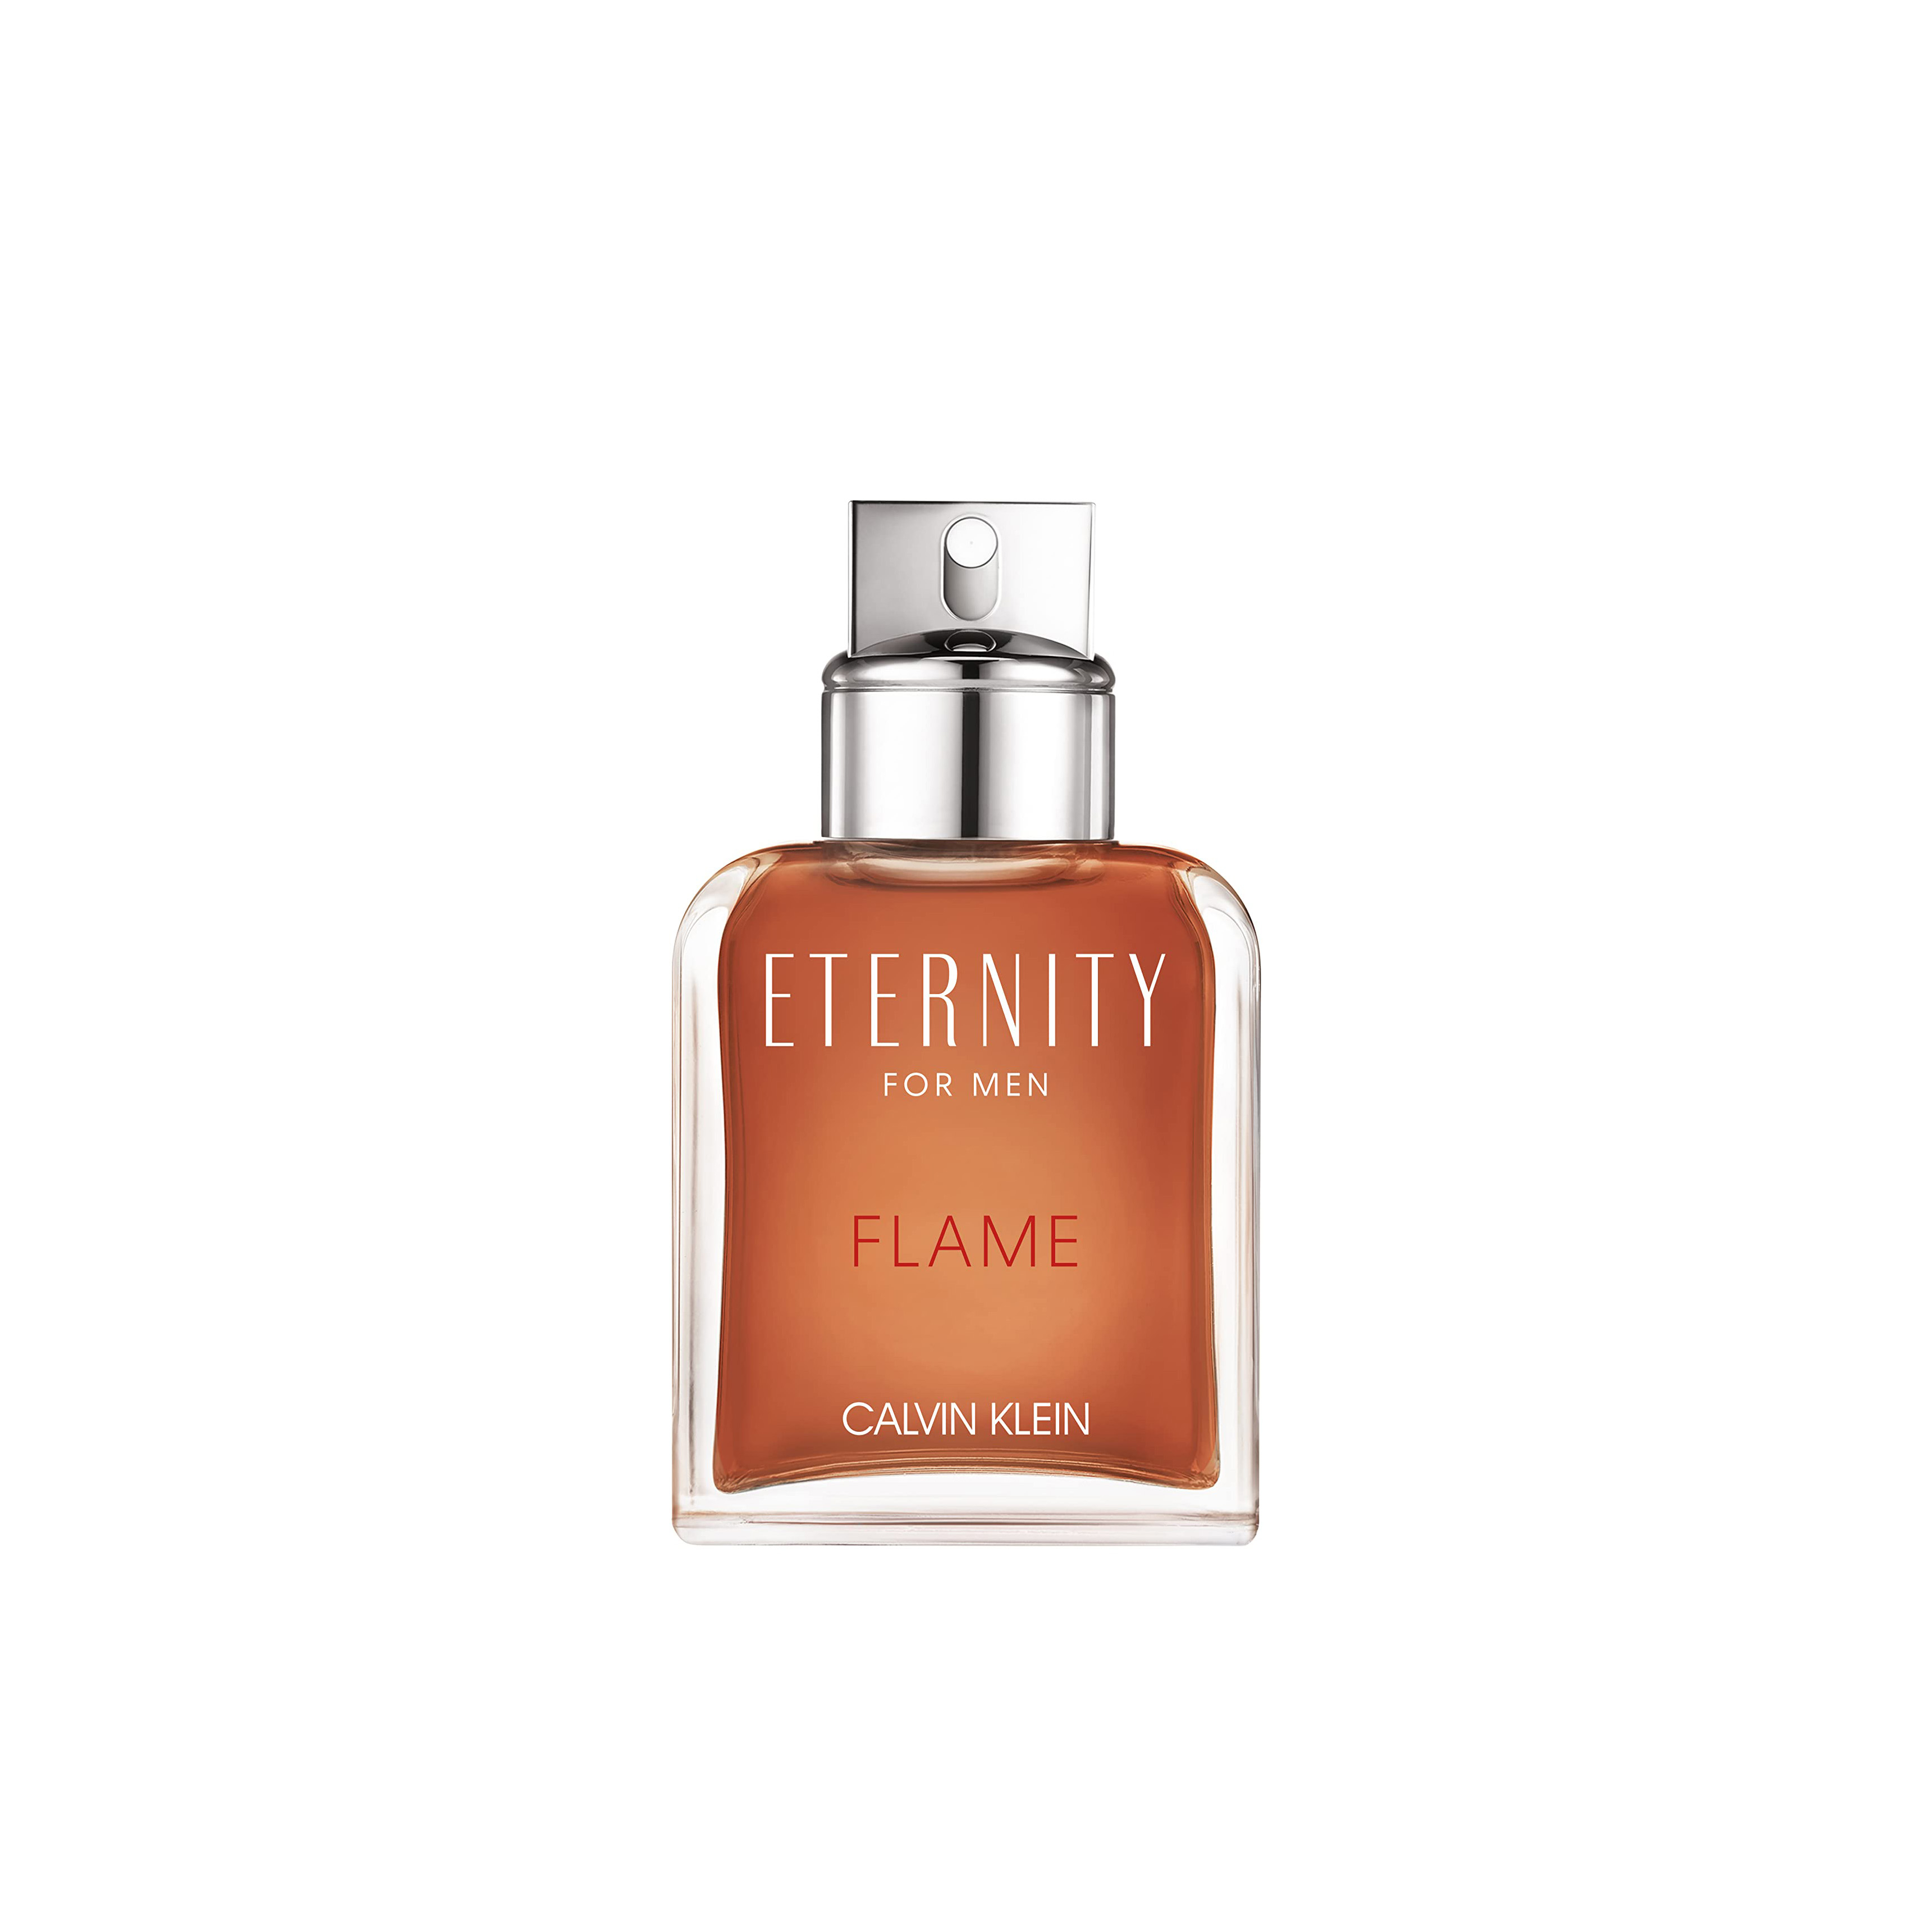 Eternity Flame by Calvin Klein for Men - 3.4 oz EDT Spray - image 2 of 3